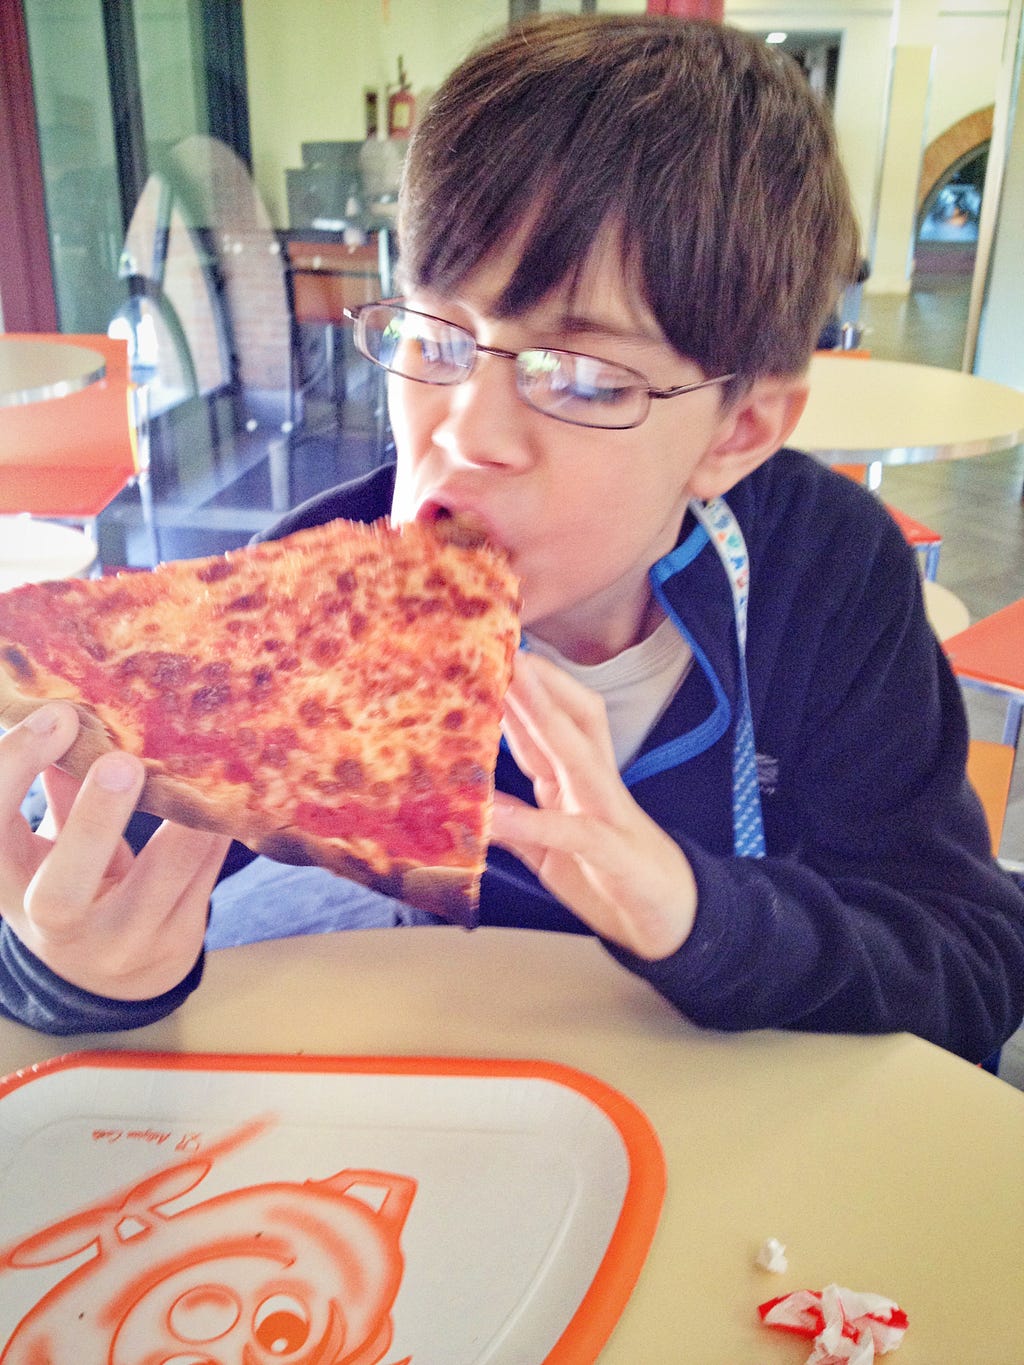 Young boy with glasses eating a large slice of pizza